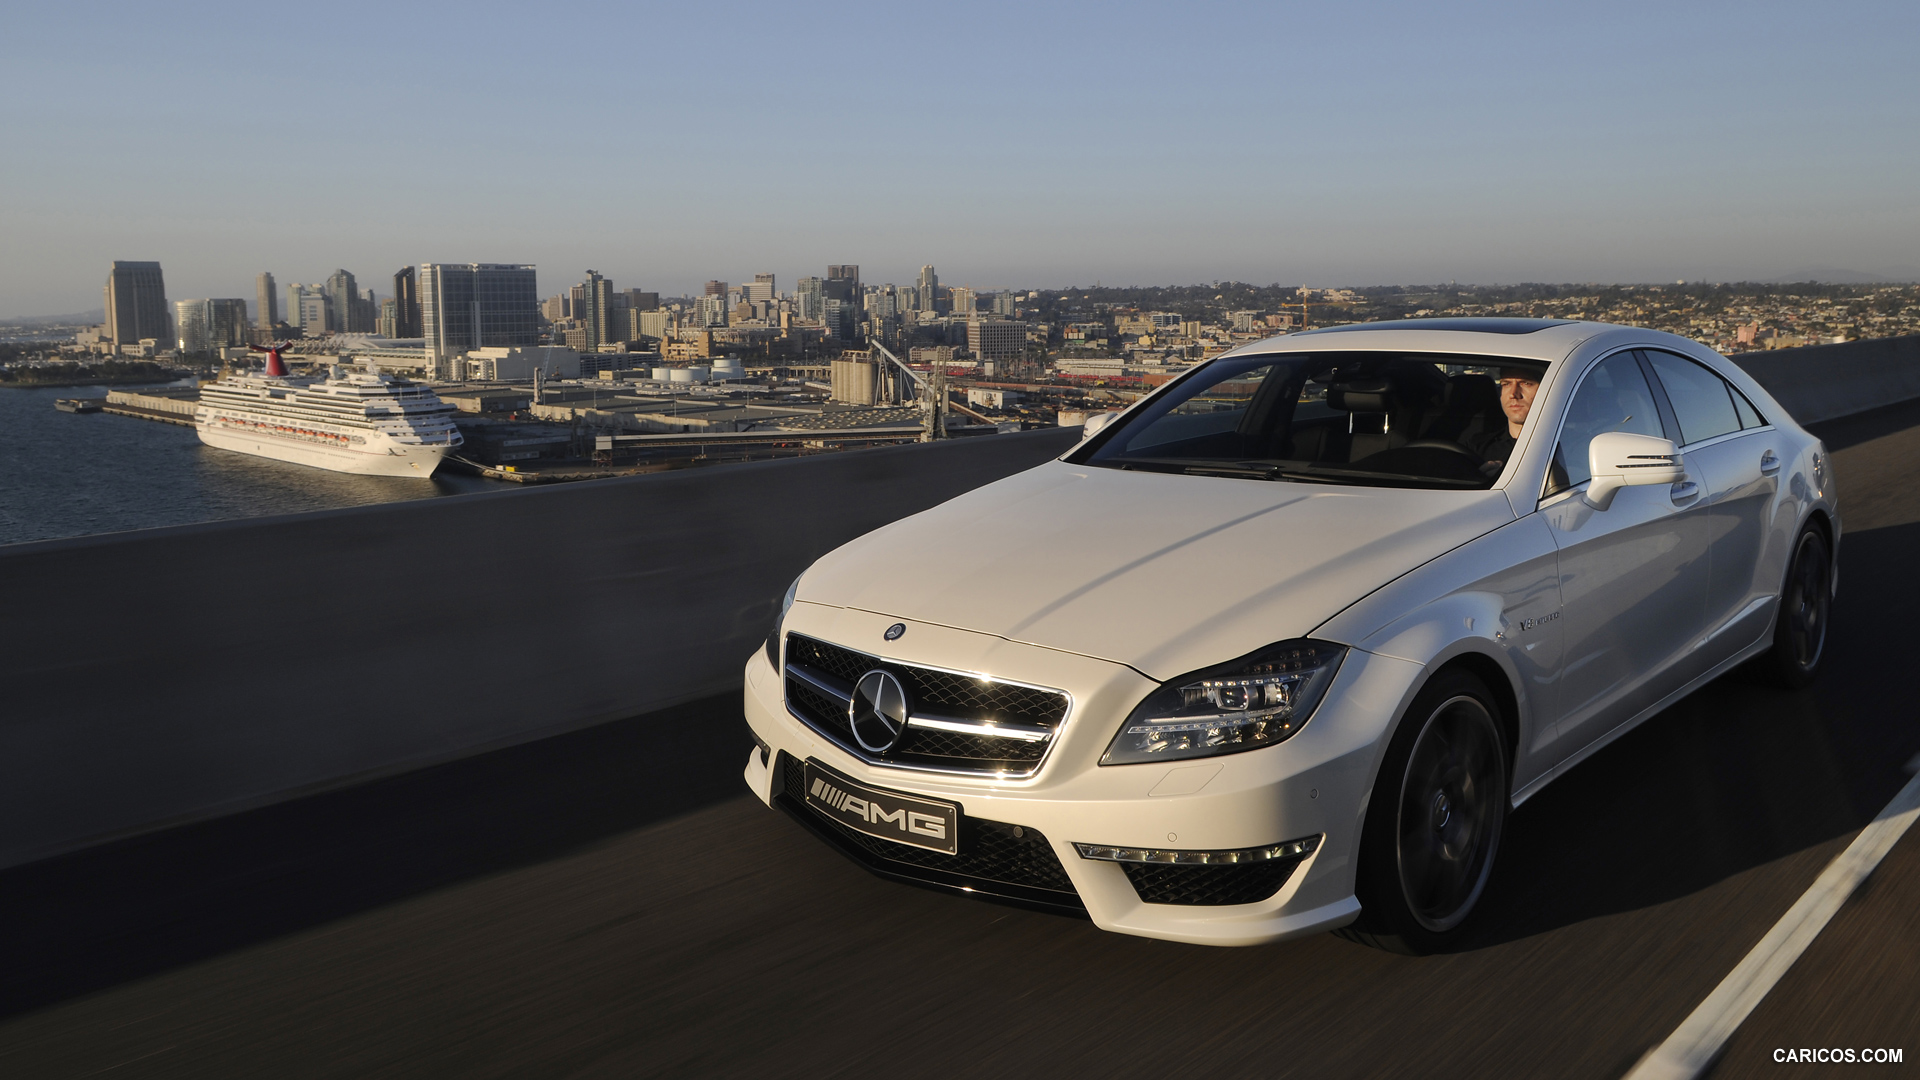 Mercedes-Benz CLS63 AMG (2012) US-Version - Diamond White - Front , #8 of 100